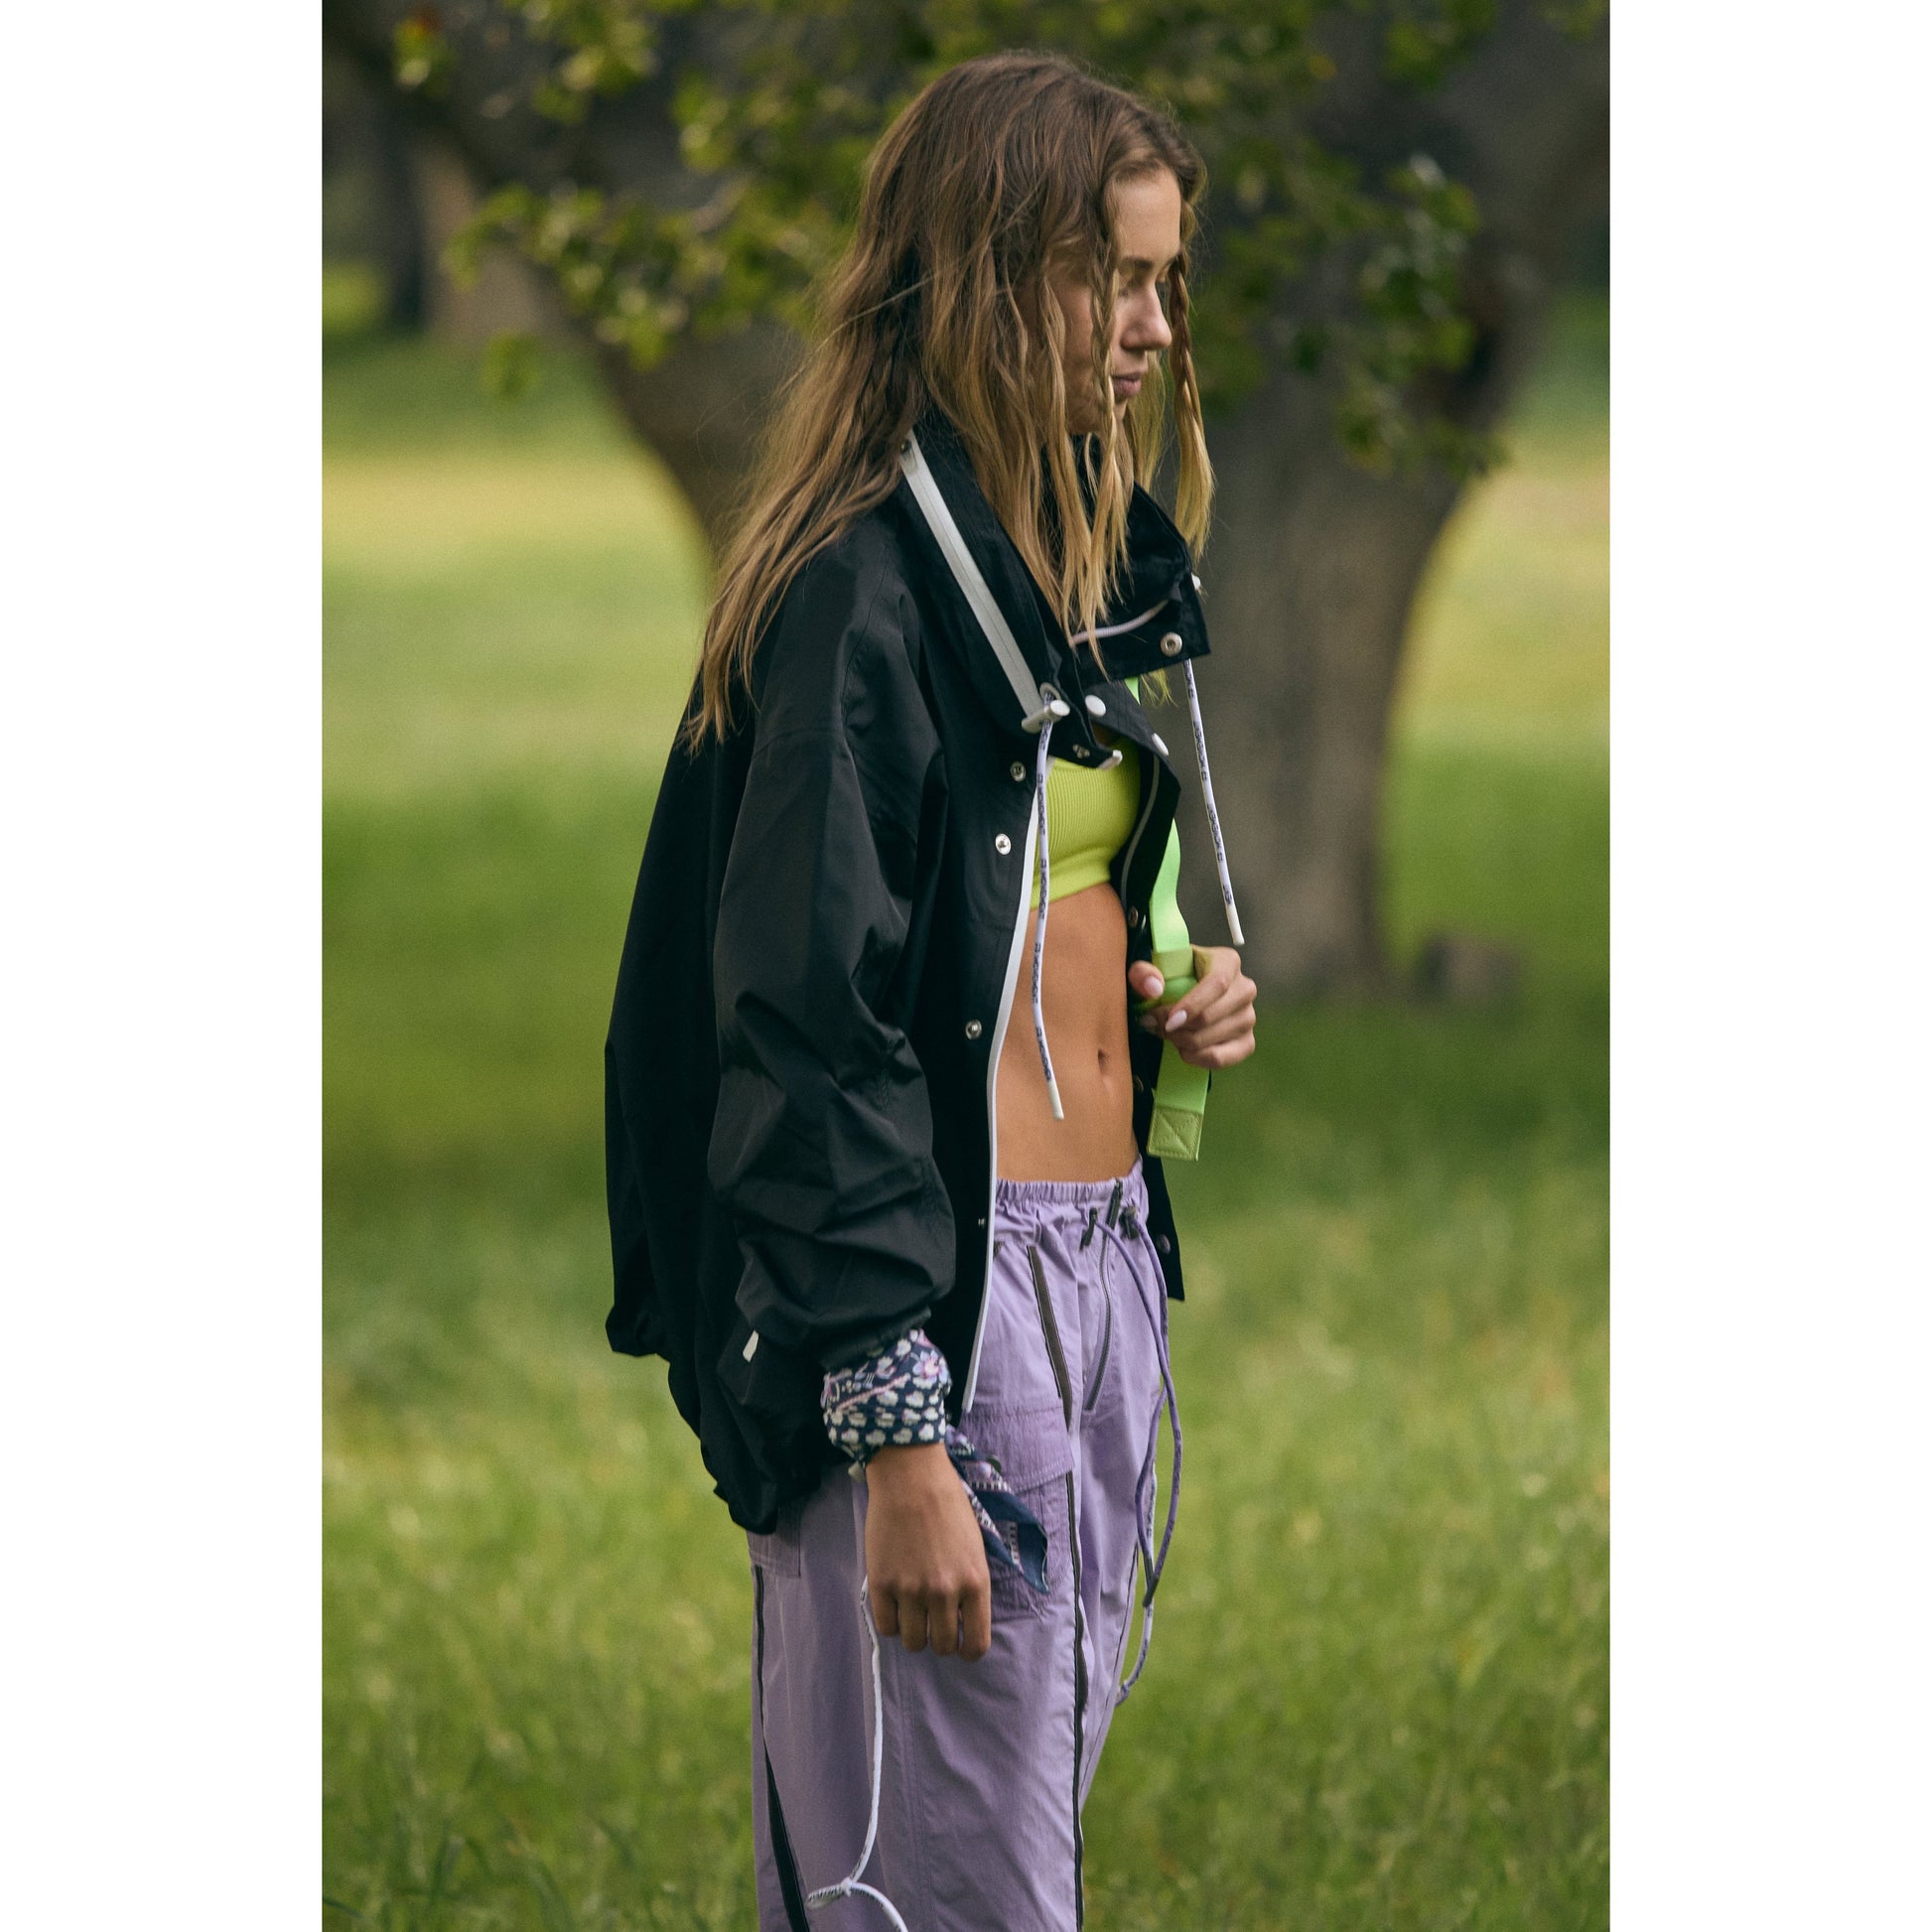 A young woman standing in a grassy field, wearing a Free People Movement Rain & Shine Jacket in black, lime green crop top, and purple track pants.